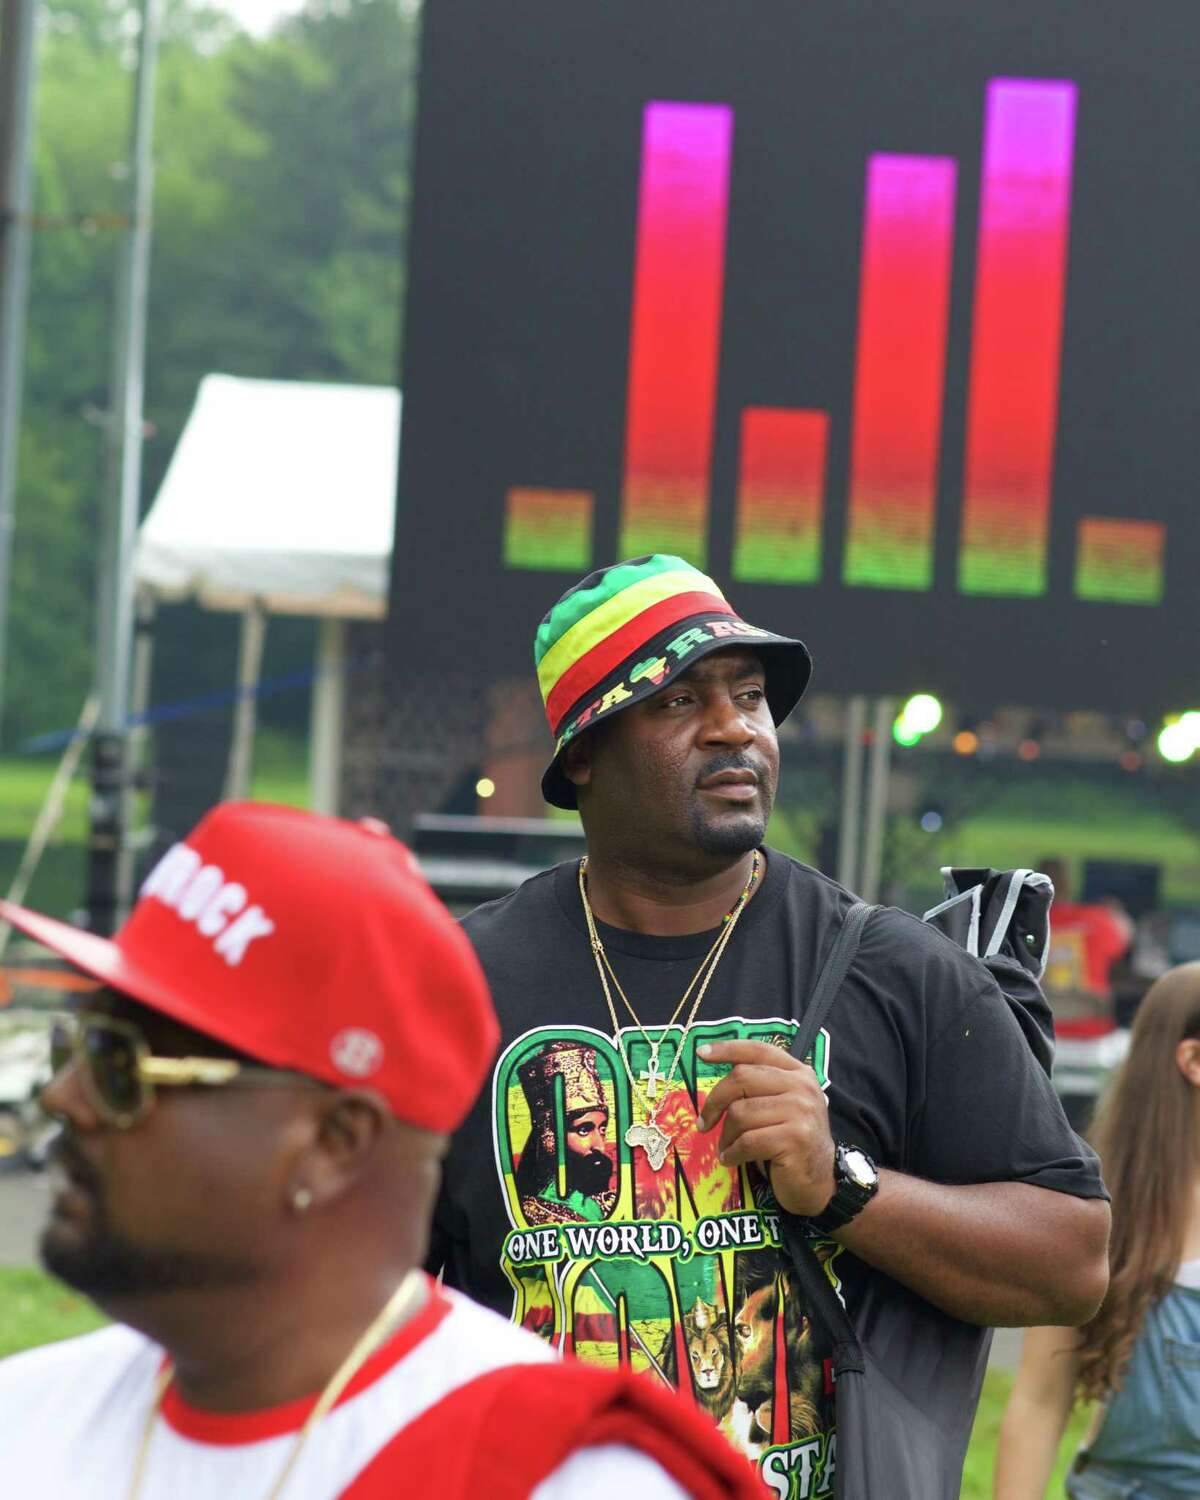 Andre Davis from Danbury scopes out a good spot on the lawn at the Sixth Annual Westside Reggae Festival that took place on Sunday, July 23rd, 2017, at Ives Concert Park in Danbury, CT.